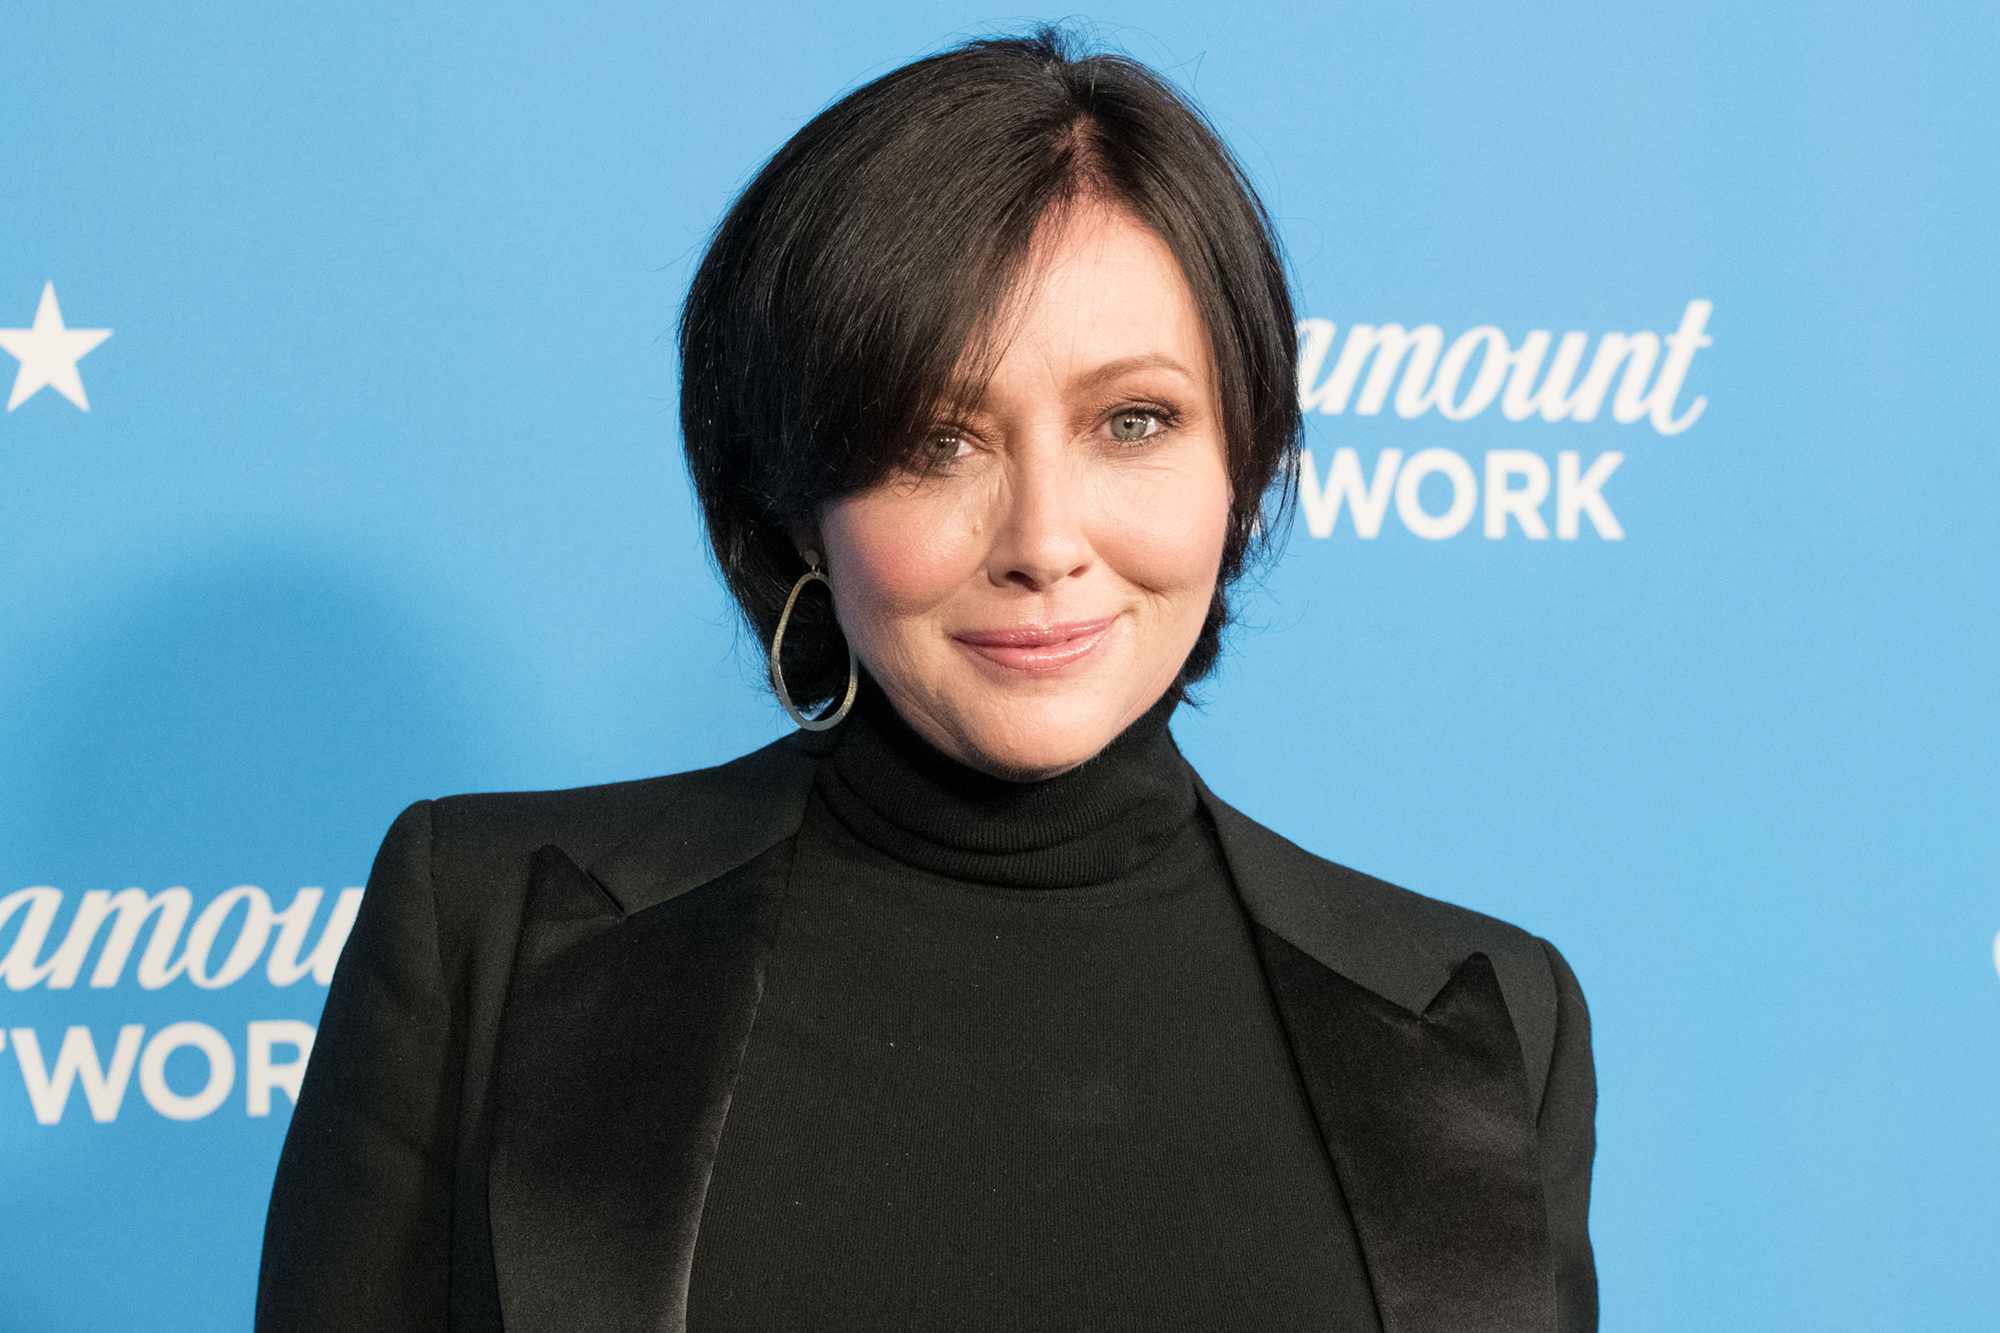 Shannen Doherty, Star of “Beverly Hills, 90210” and “Charmed,” Dies at 53: 'Devoted Daughter, Sister, Aunt and Friend'